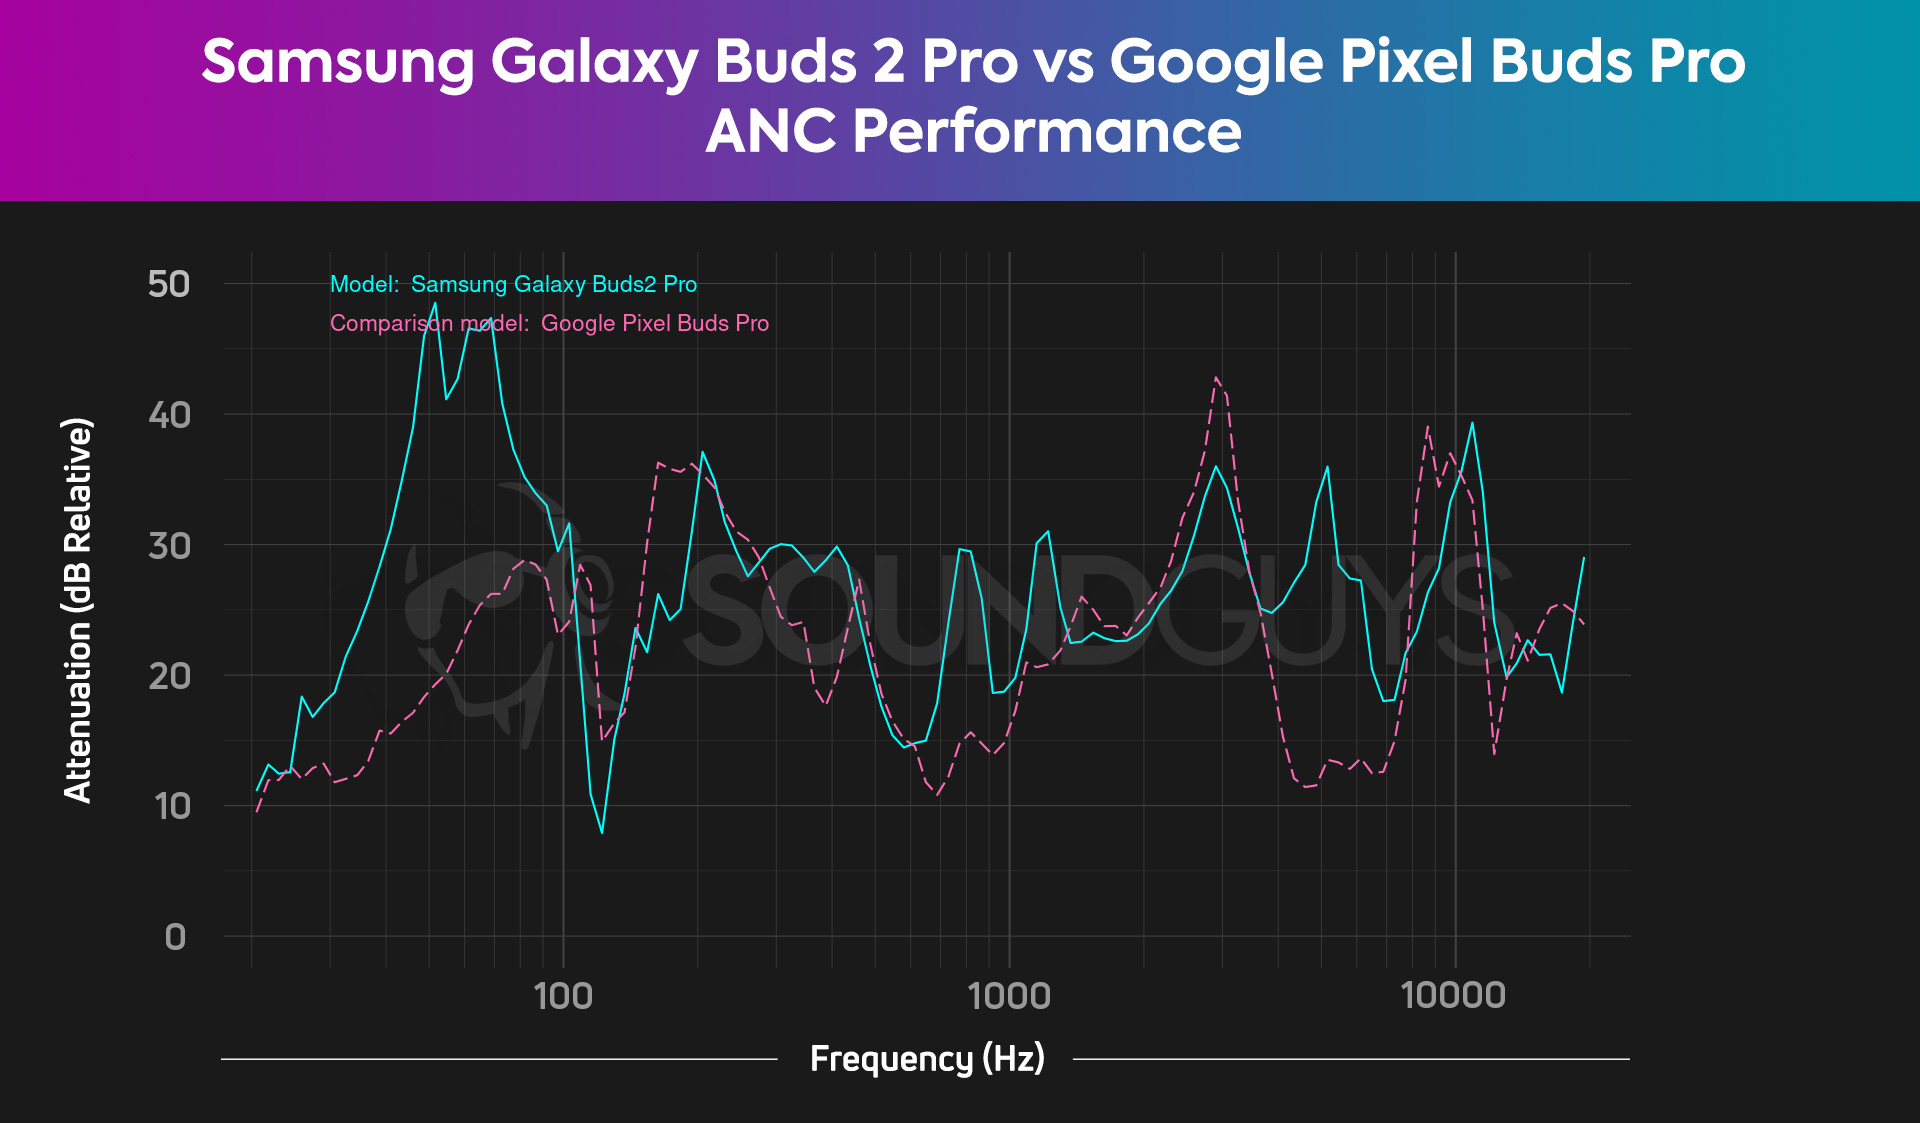 A chart compares the Samsung Galaxy Buds 2 Pro noise cancelling to the Google Pixel Buds Pro, revealing the Galaxy Buds 2 Pro has better ANC.